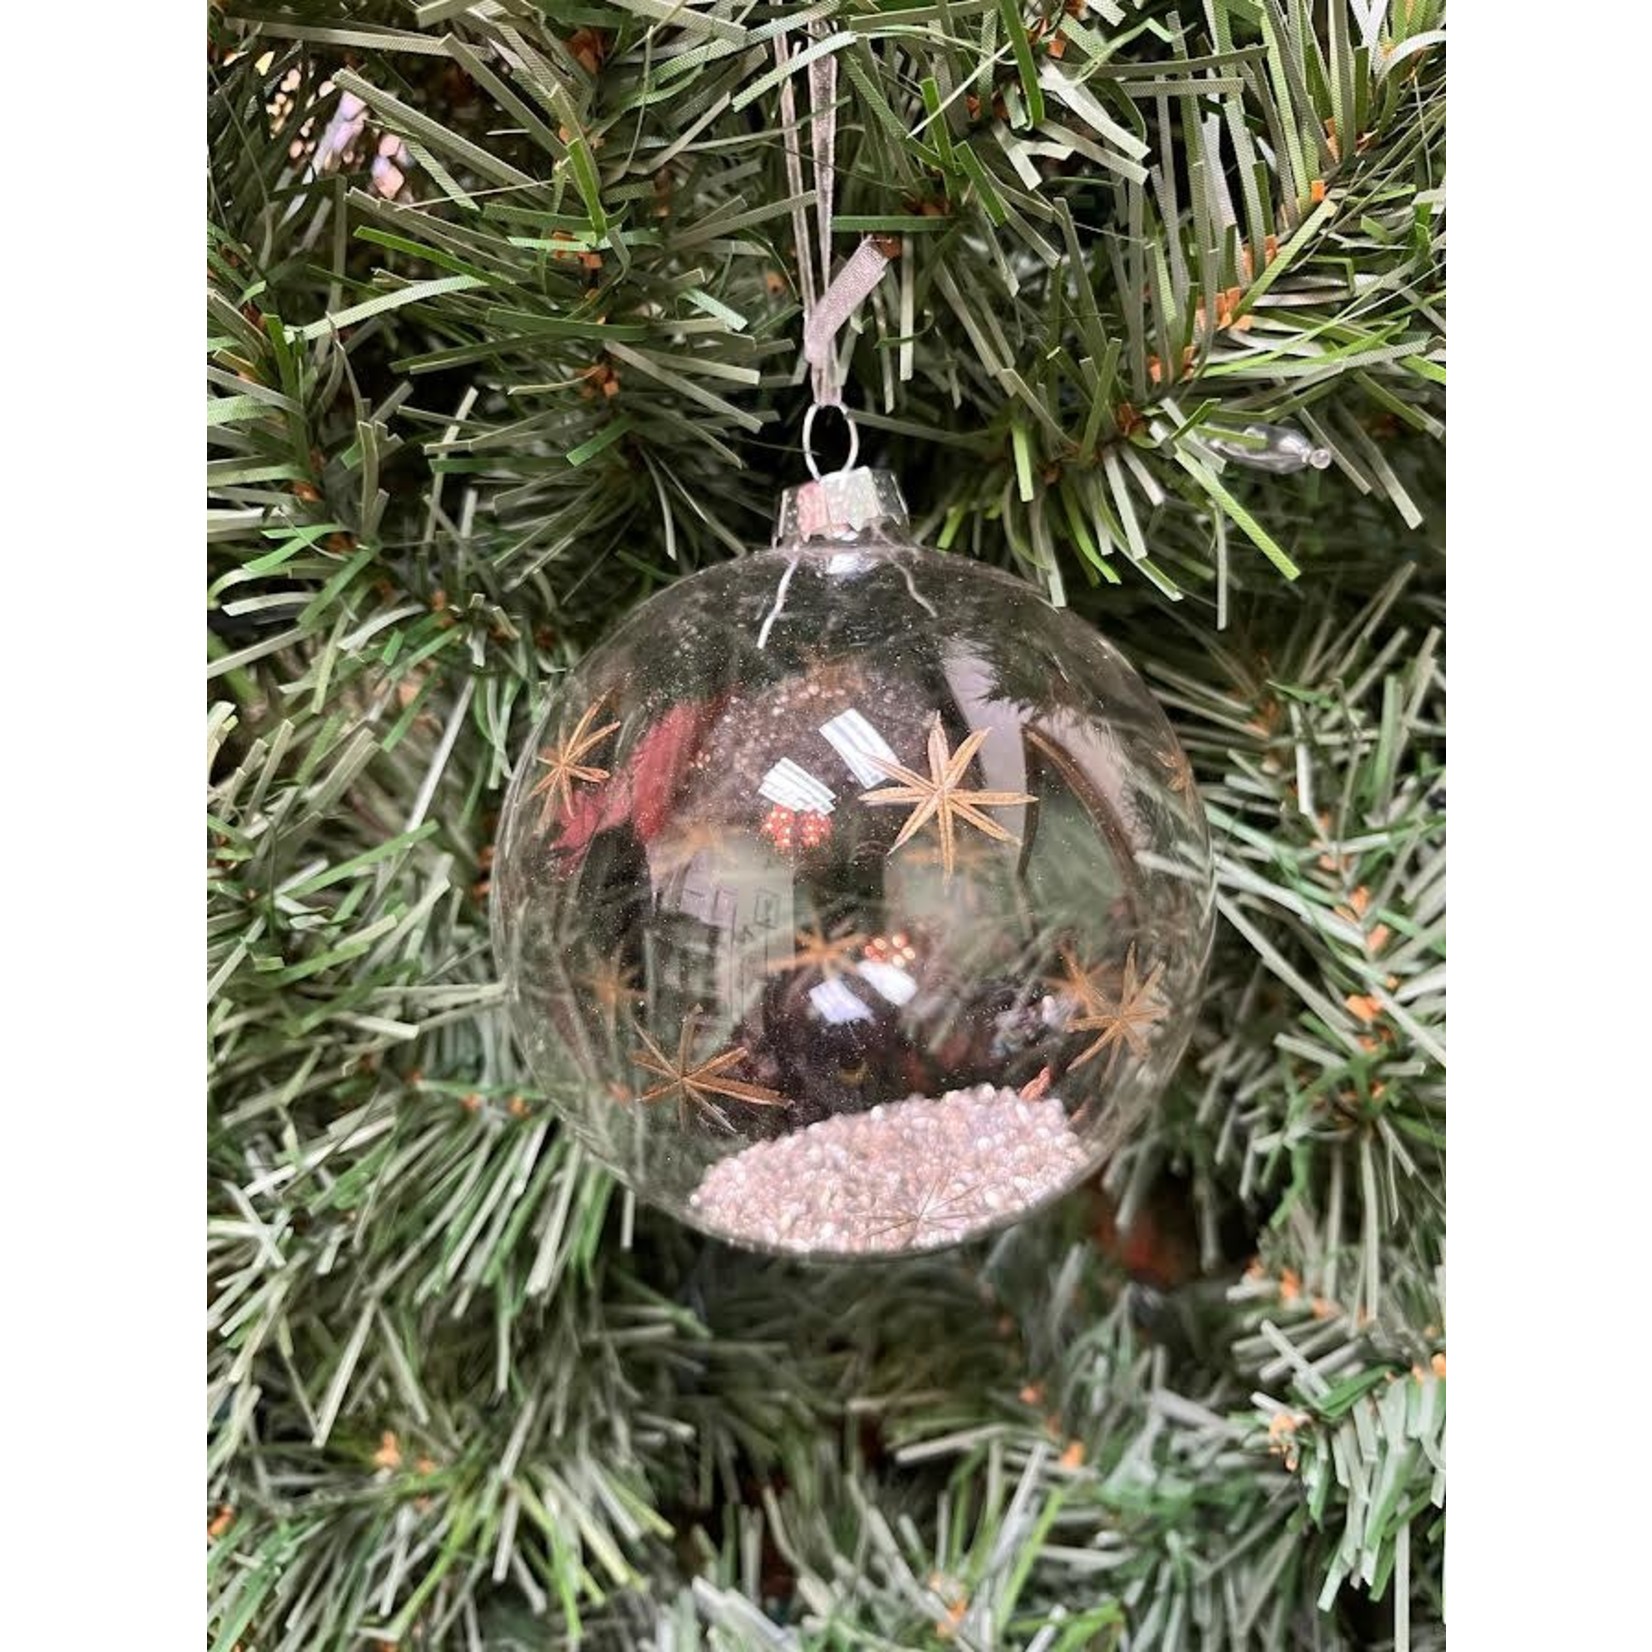 Zodax Clear Ball With Decoration Ornament - Medium